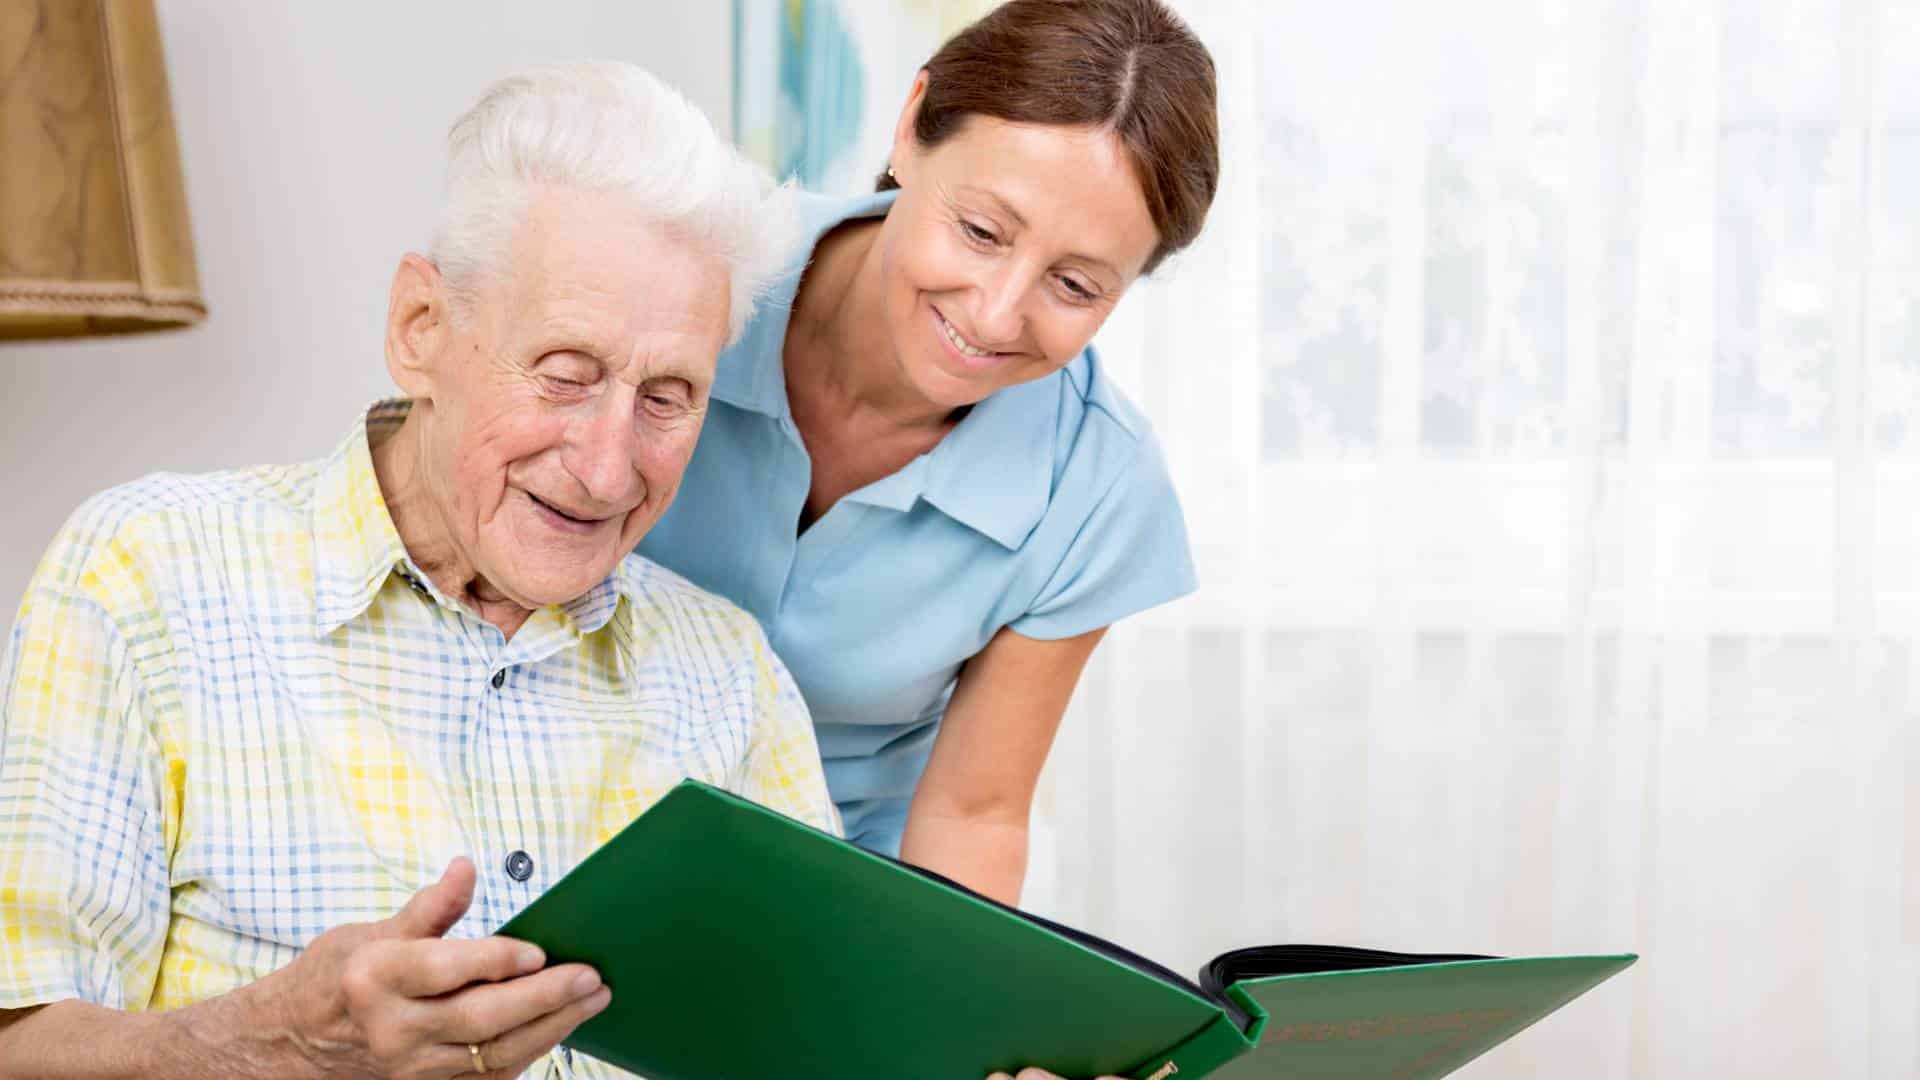 aged care worker with elderly resident